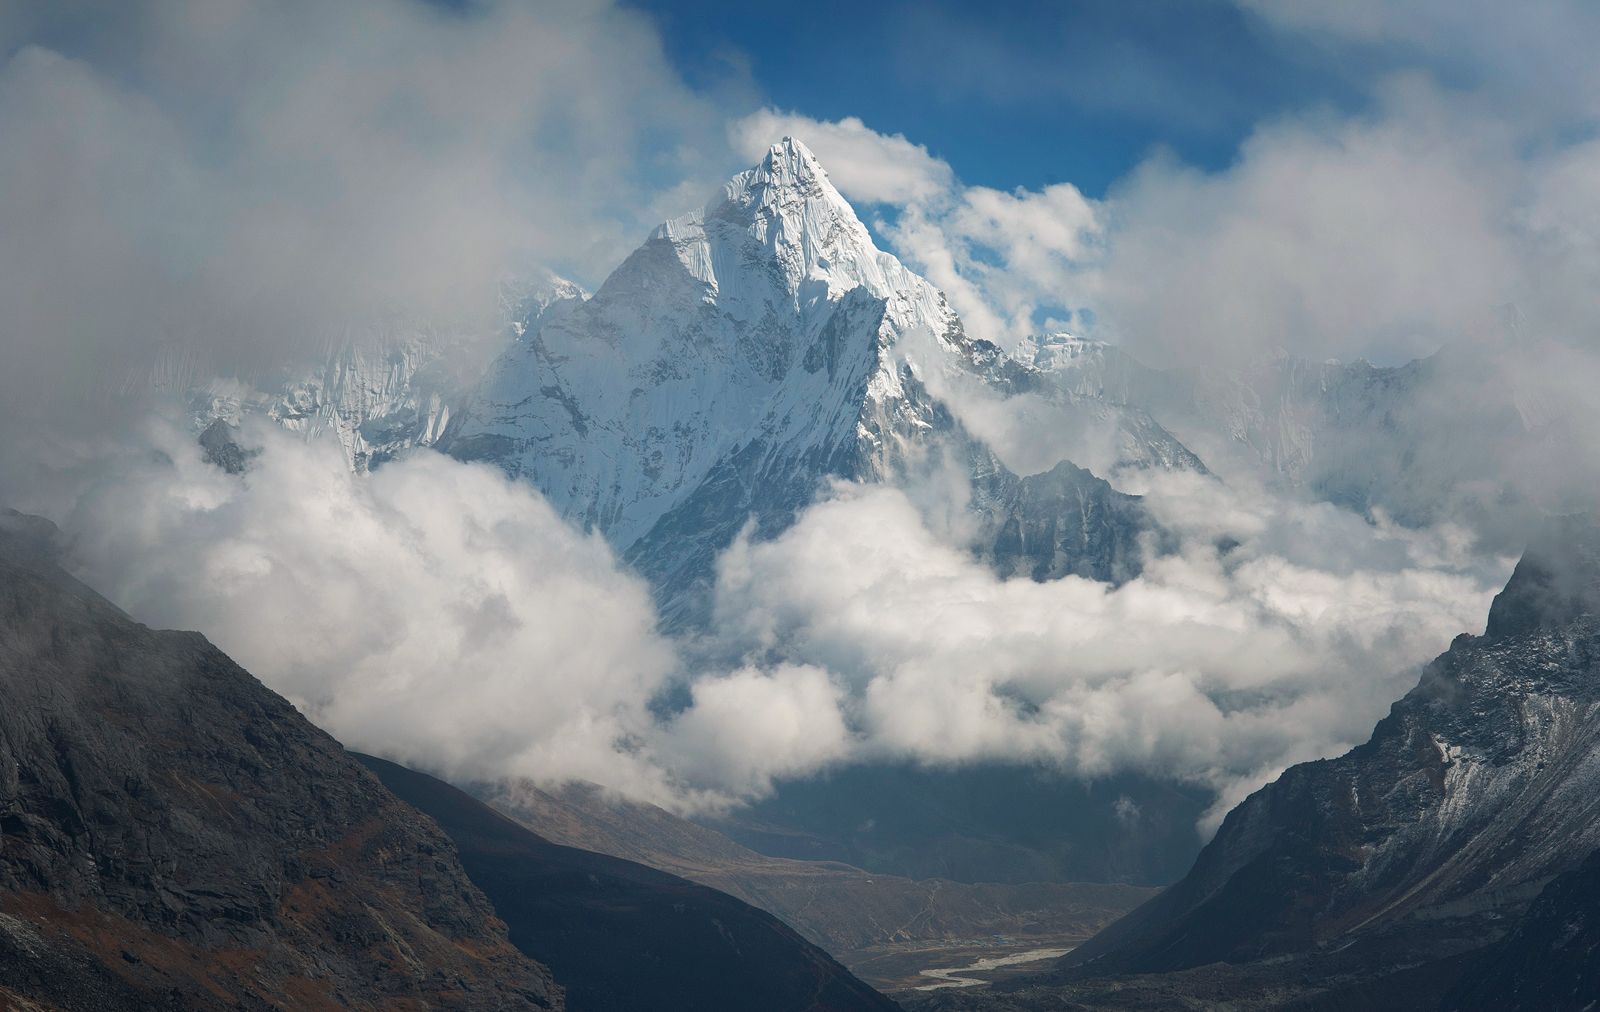 The view of Mount Everest from Cho La, a high mountain pass in Nepal's Gokyo Valley.